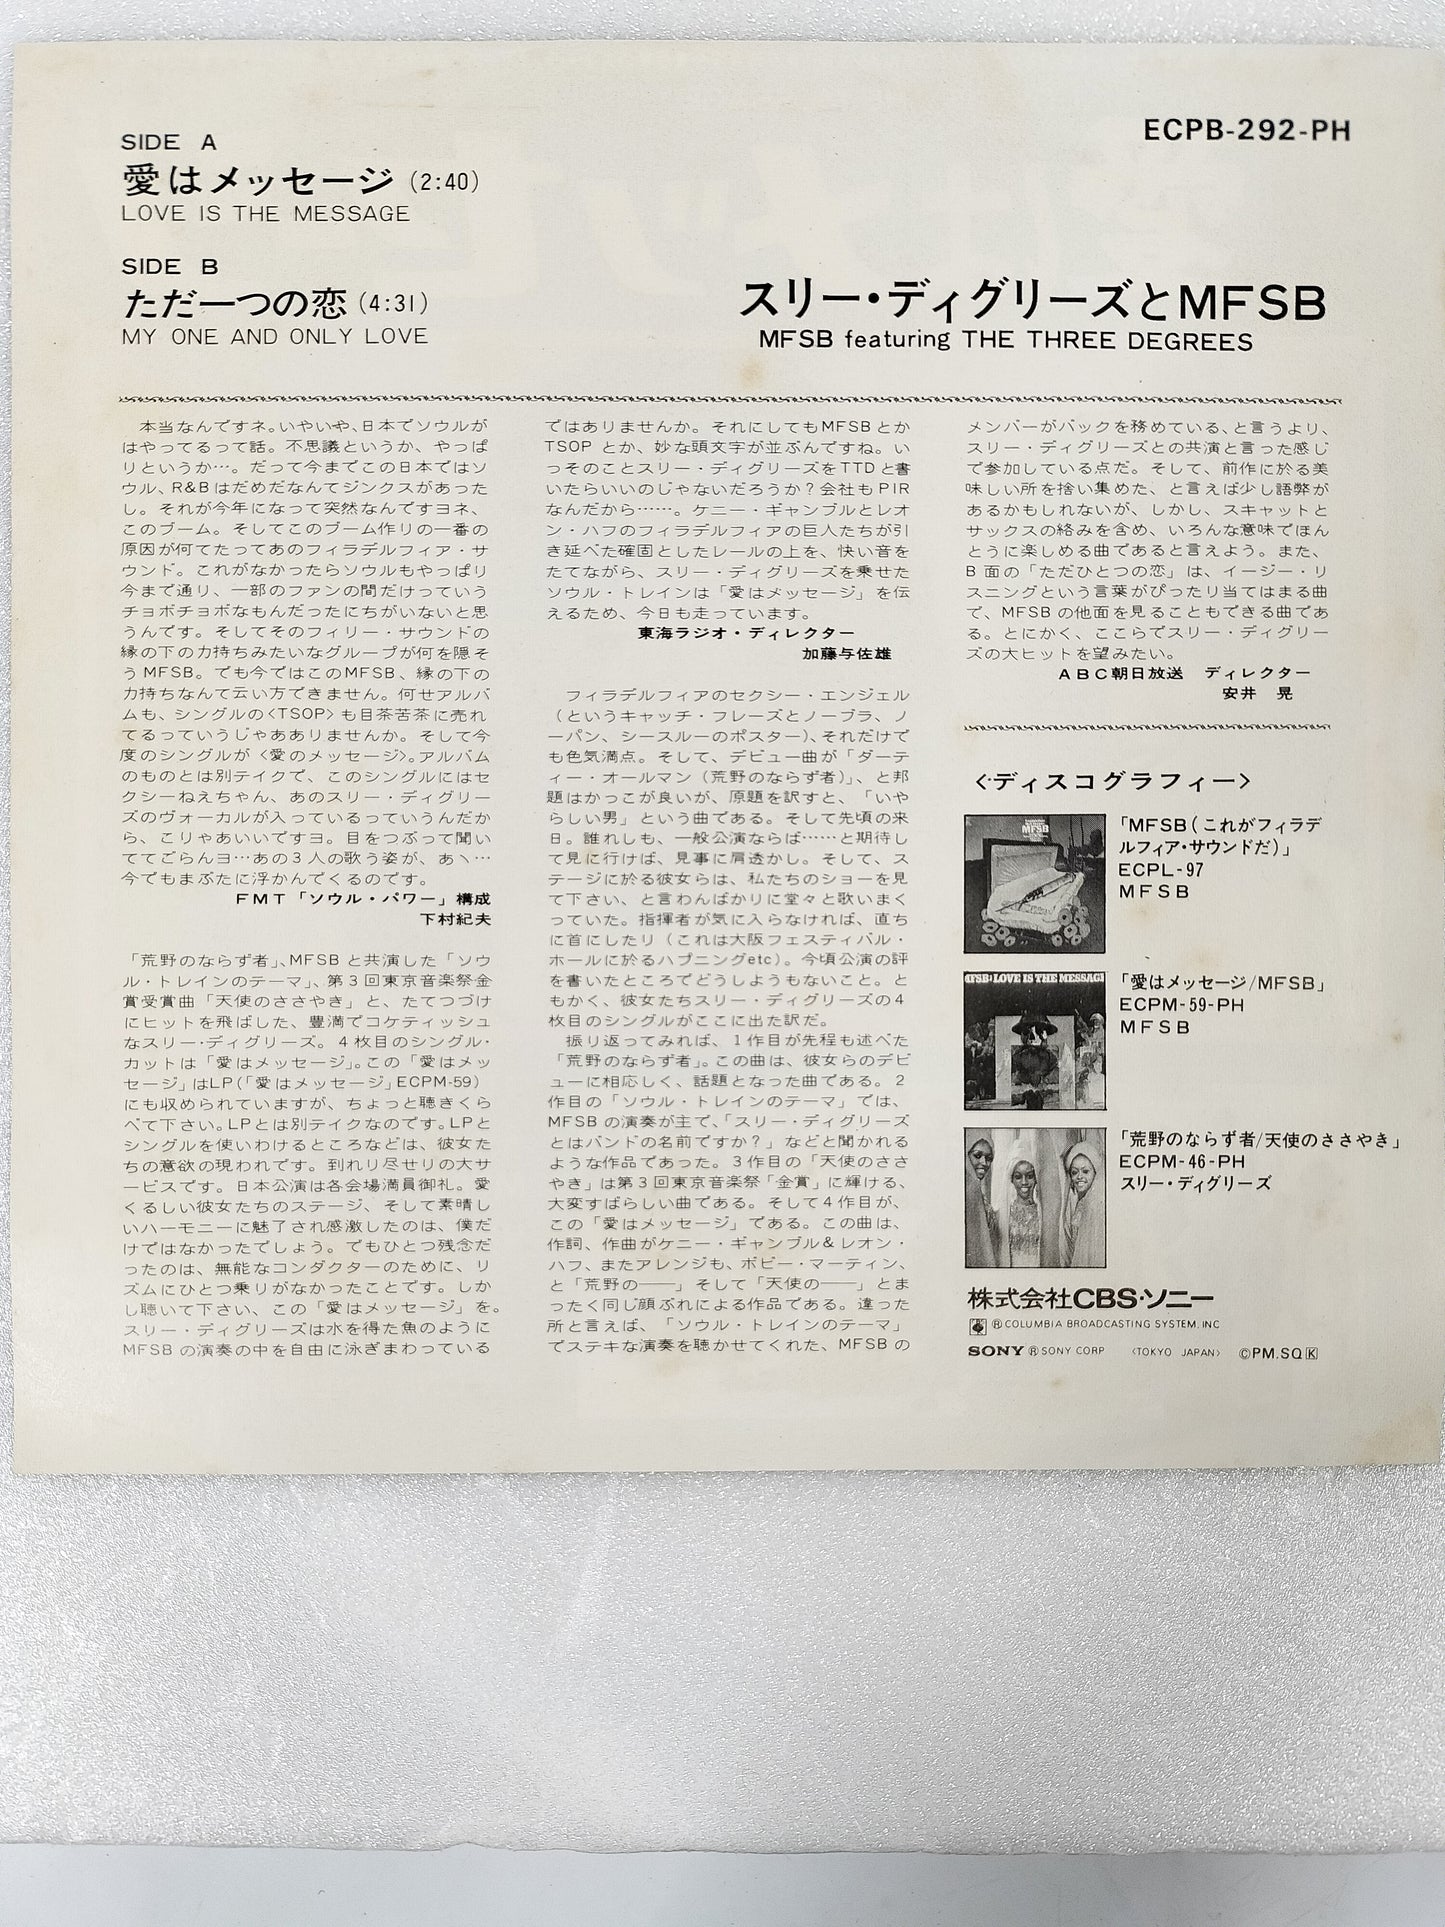 1974 Love is a Message Three Degrees B: Only One Love Japanese record vintage